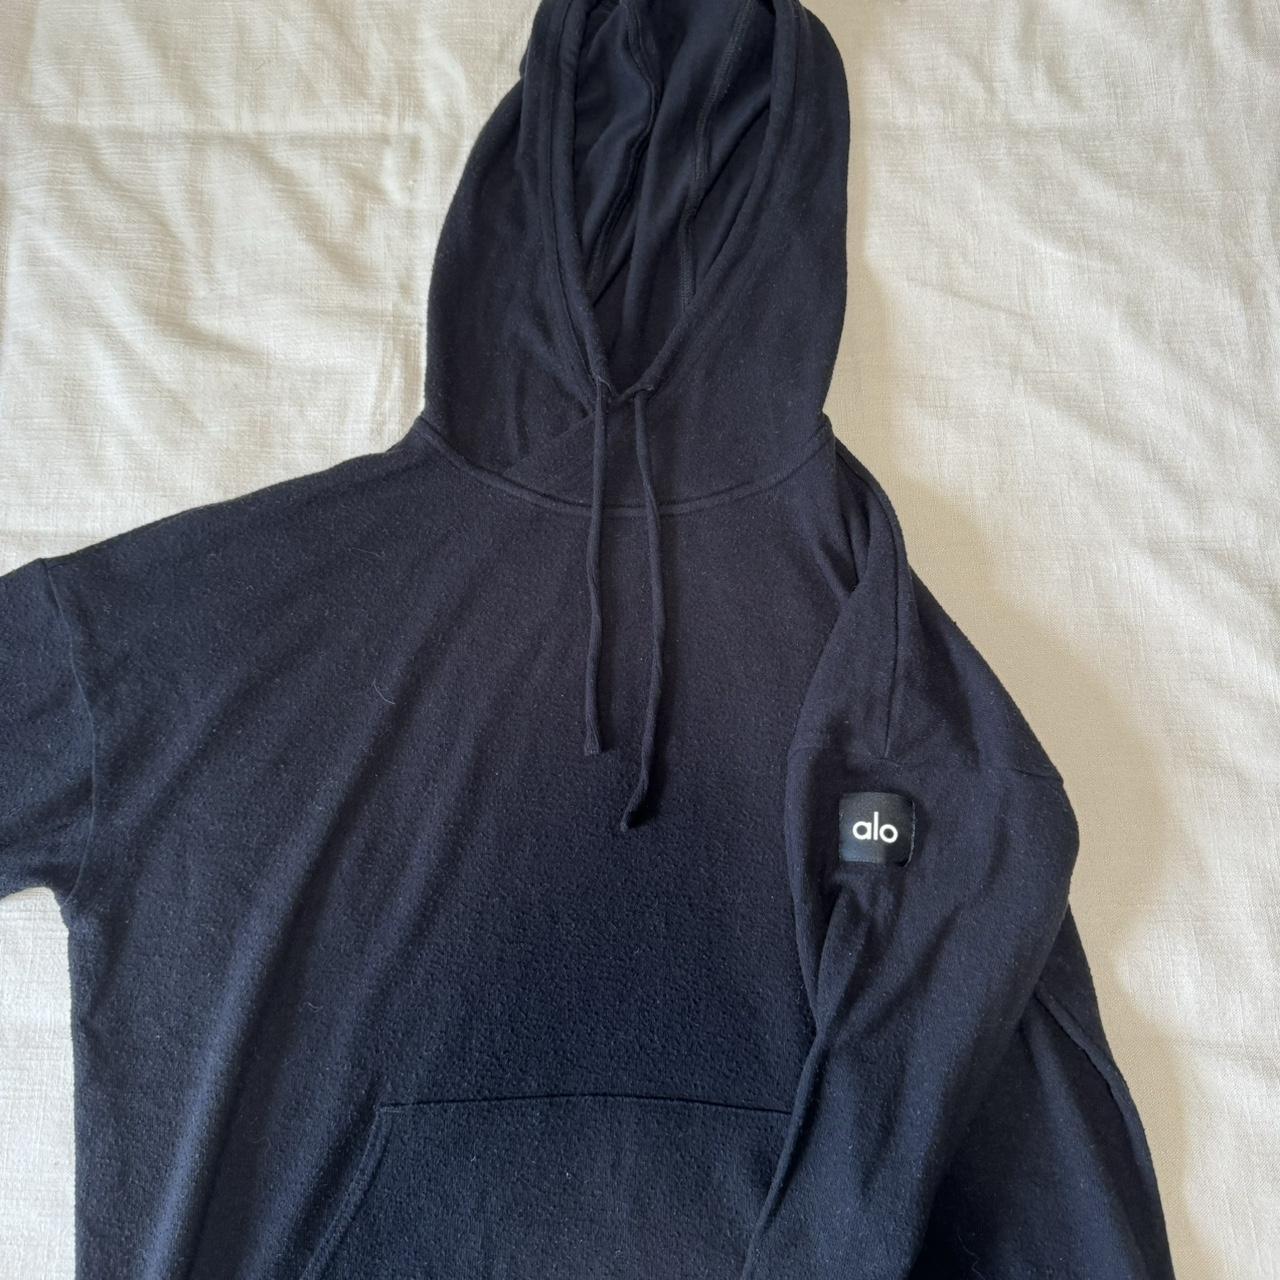 Alo yoga - alolux cozy hoodie , Size XS (can fit